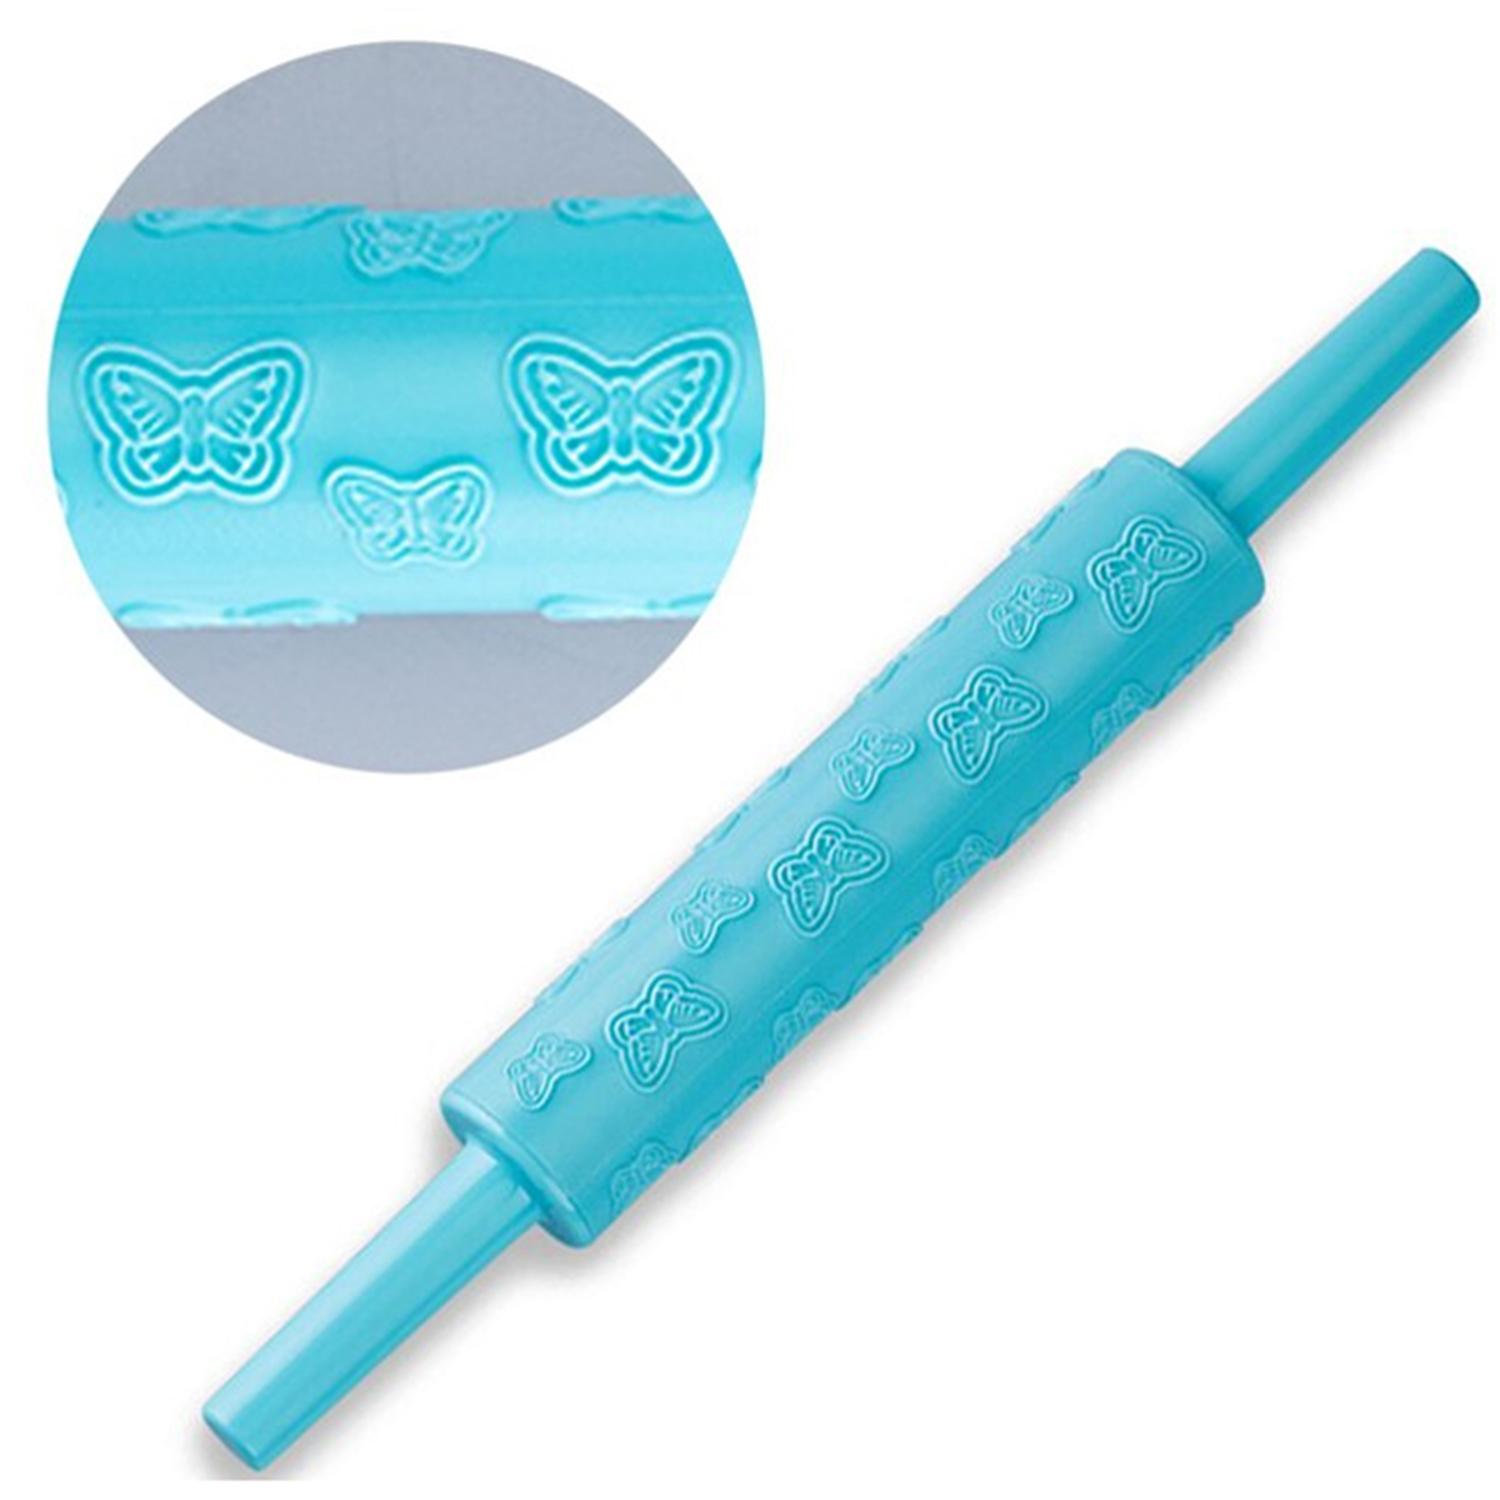 EMBOSSED ROLLING PIN 09 BLUE BUTTERFLY